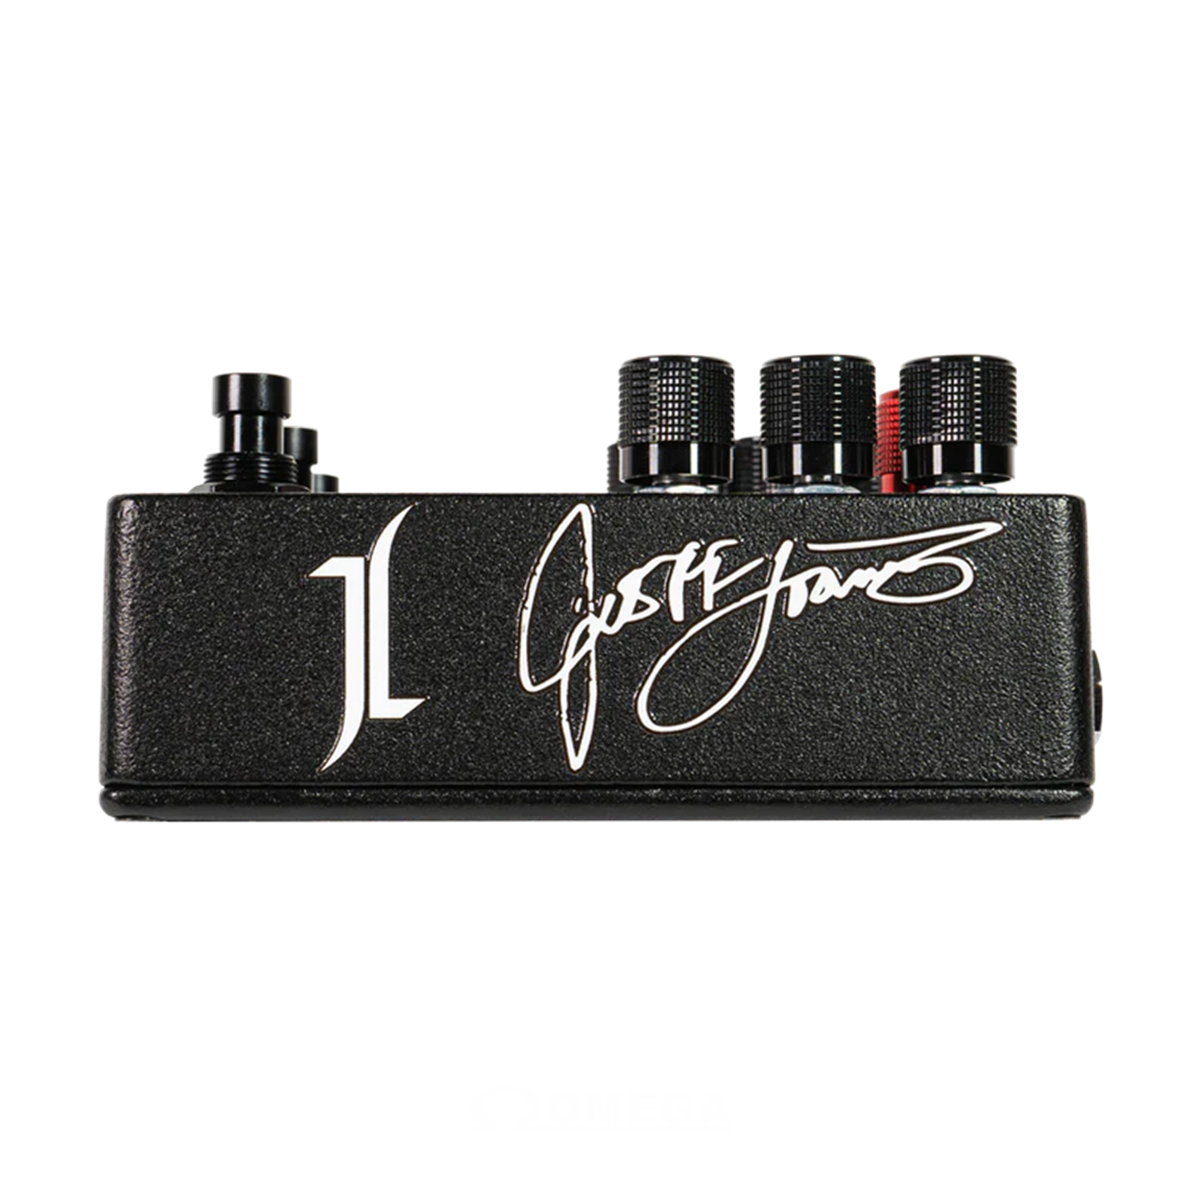 ALL PEDAL Devil's Triad Jeff Loomis Overdrive Pedal